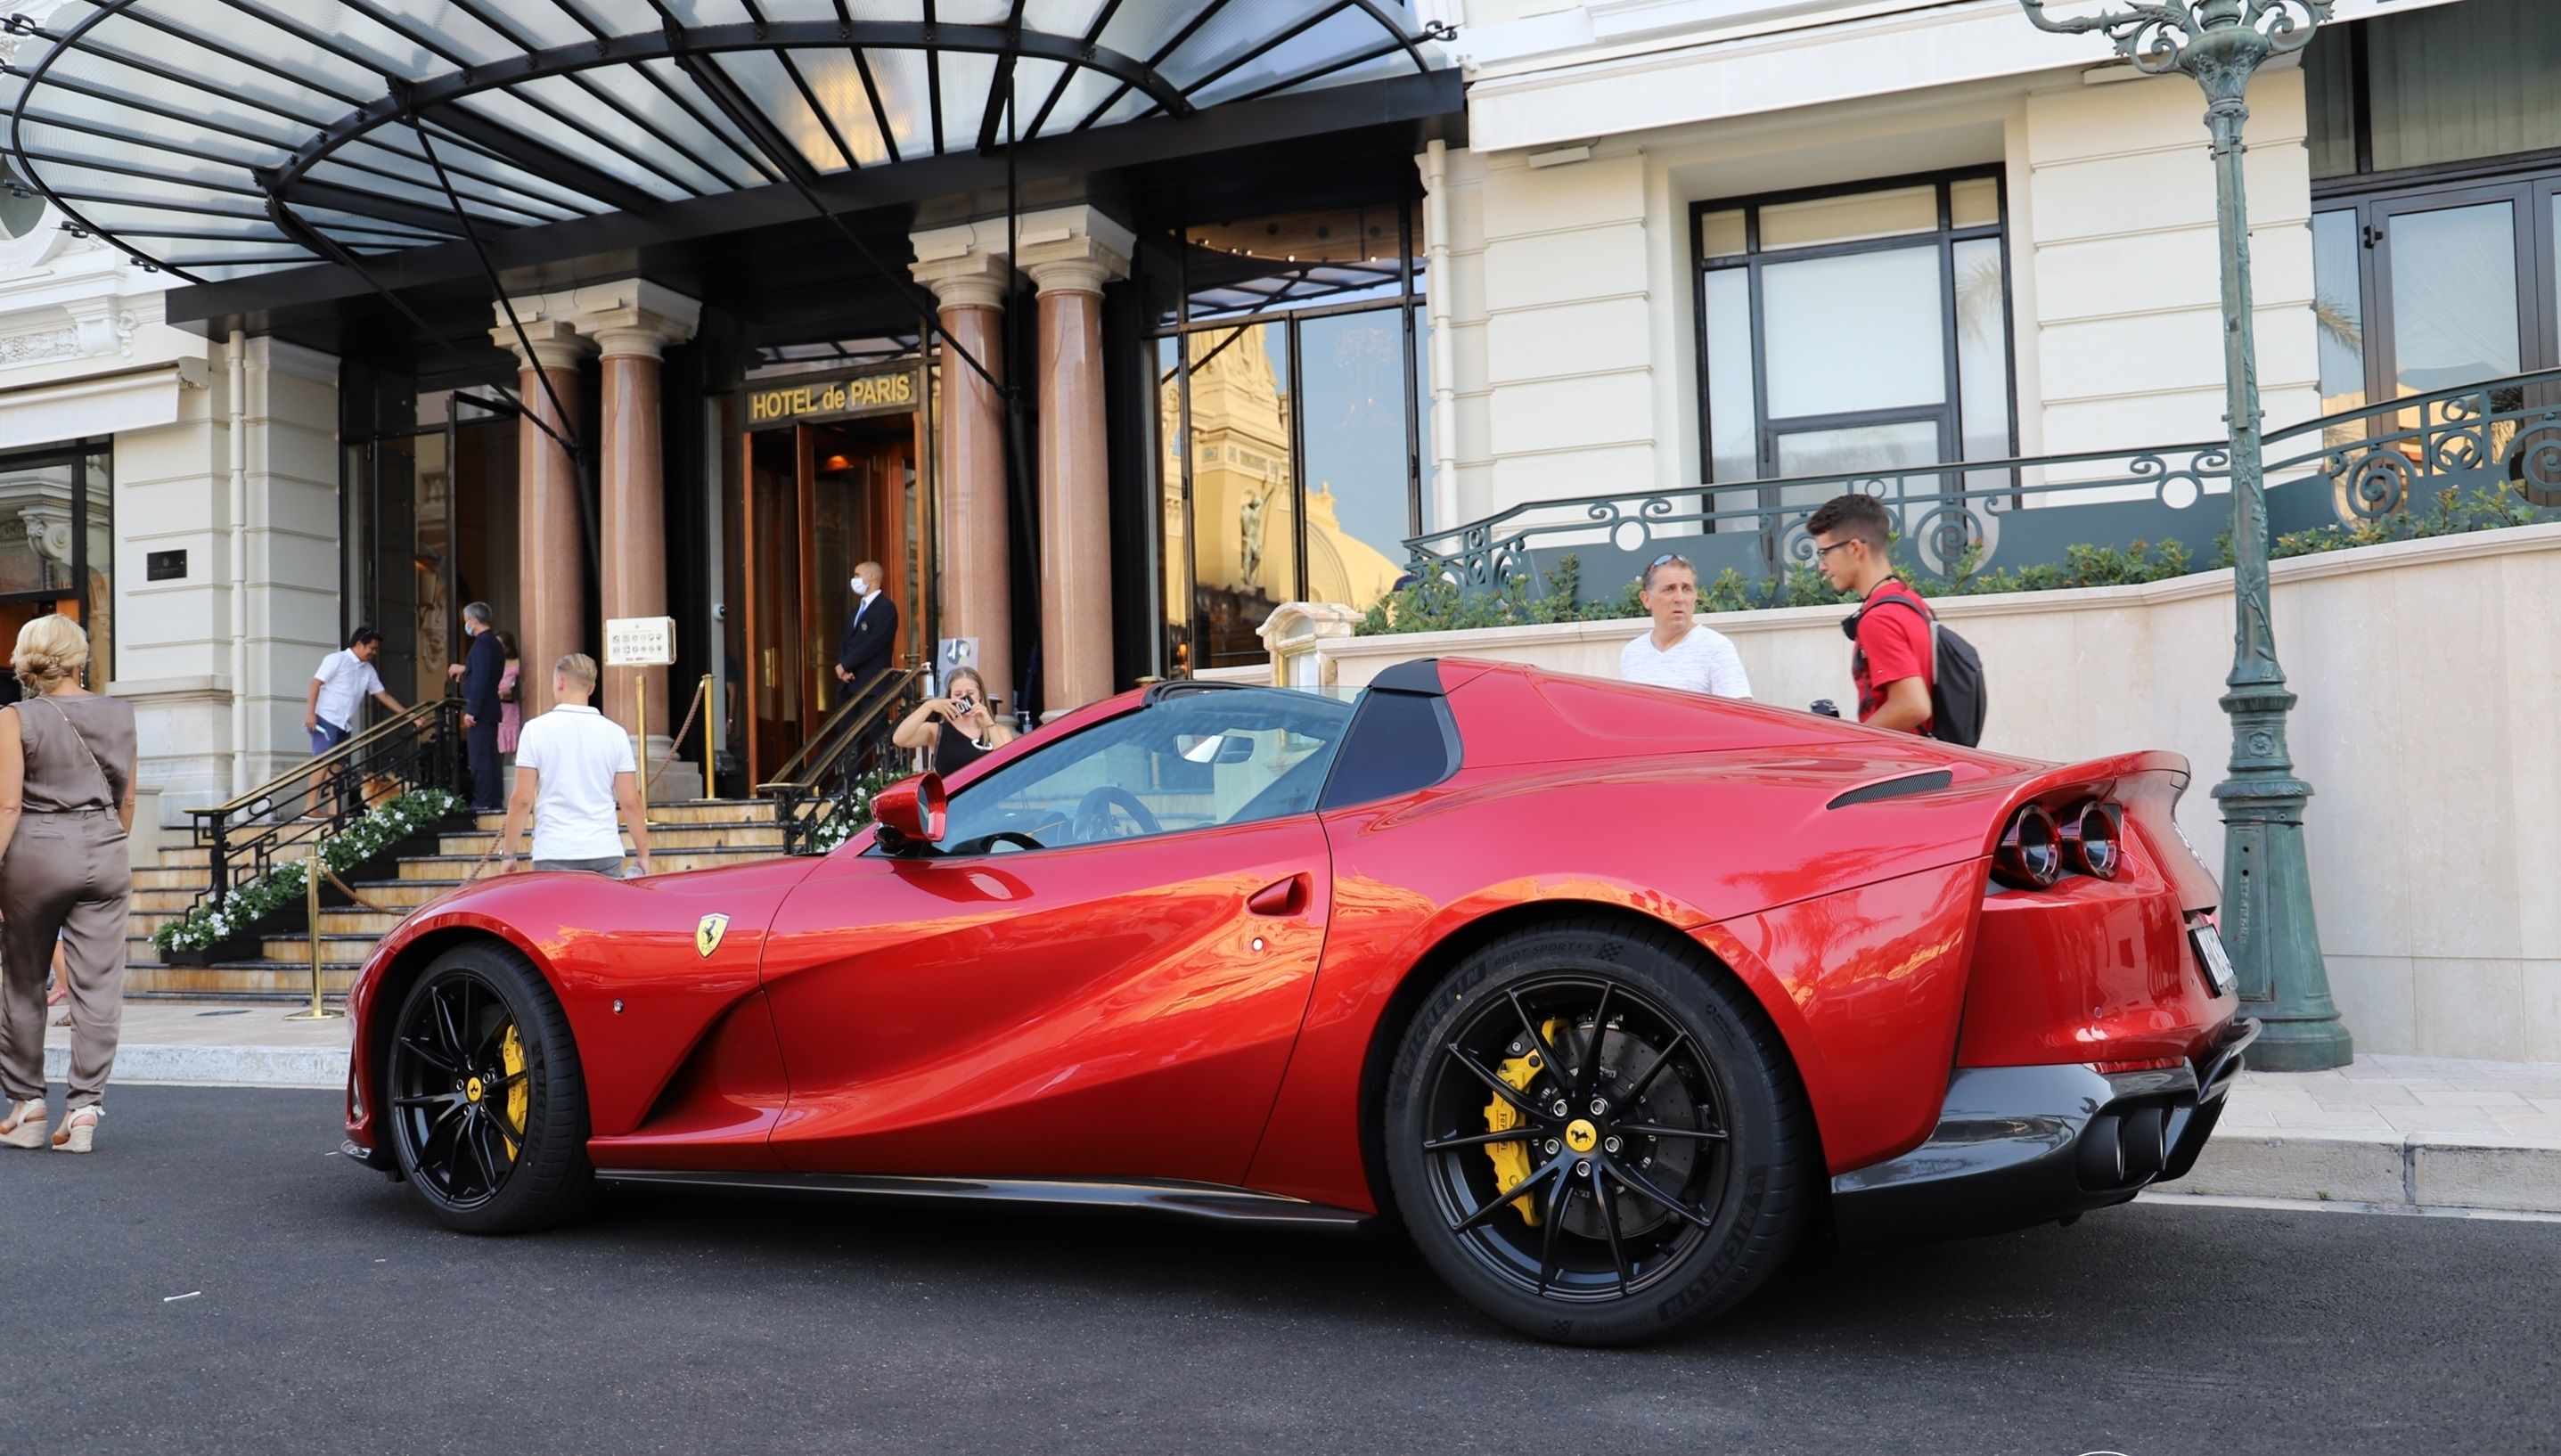 Red Ferrari 812 GTS parked in front of a hotel